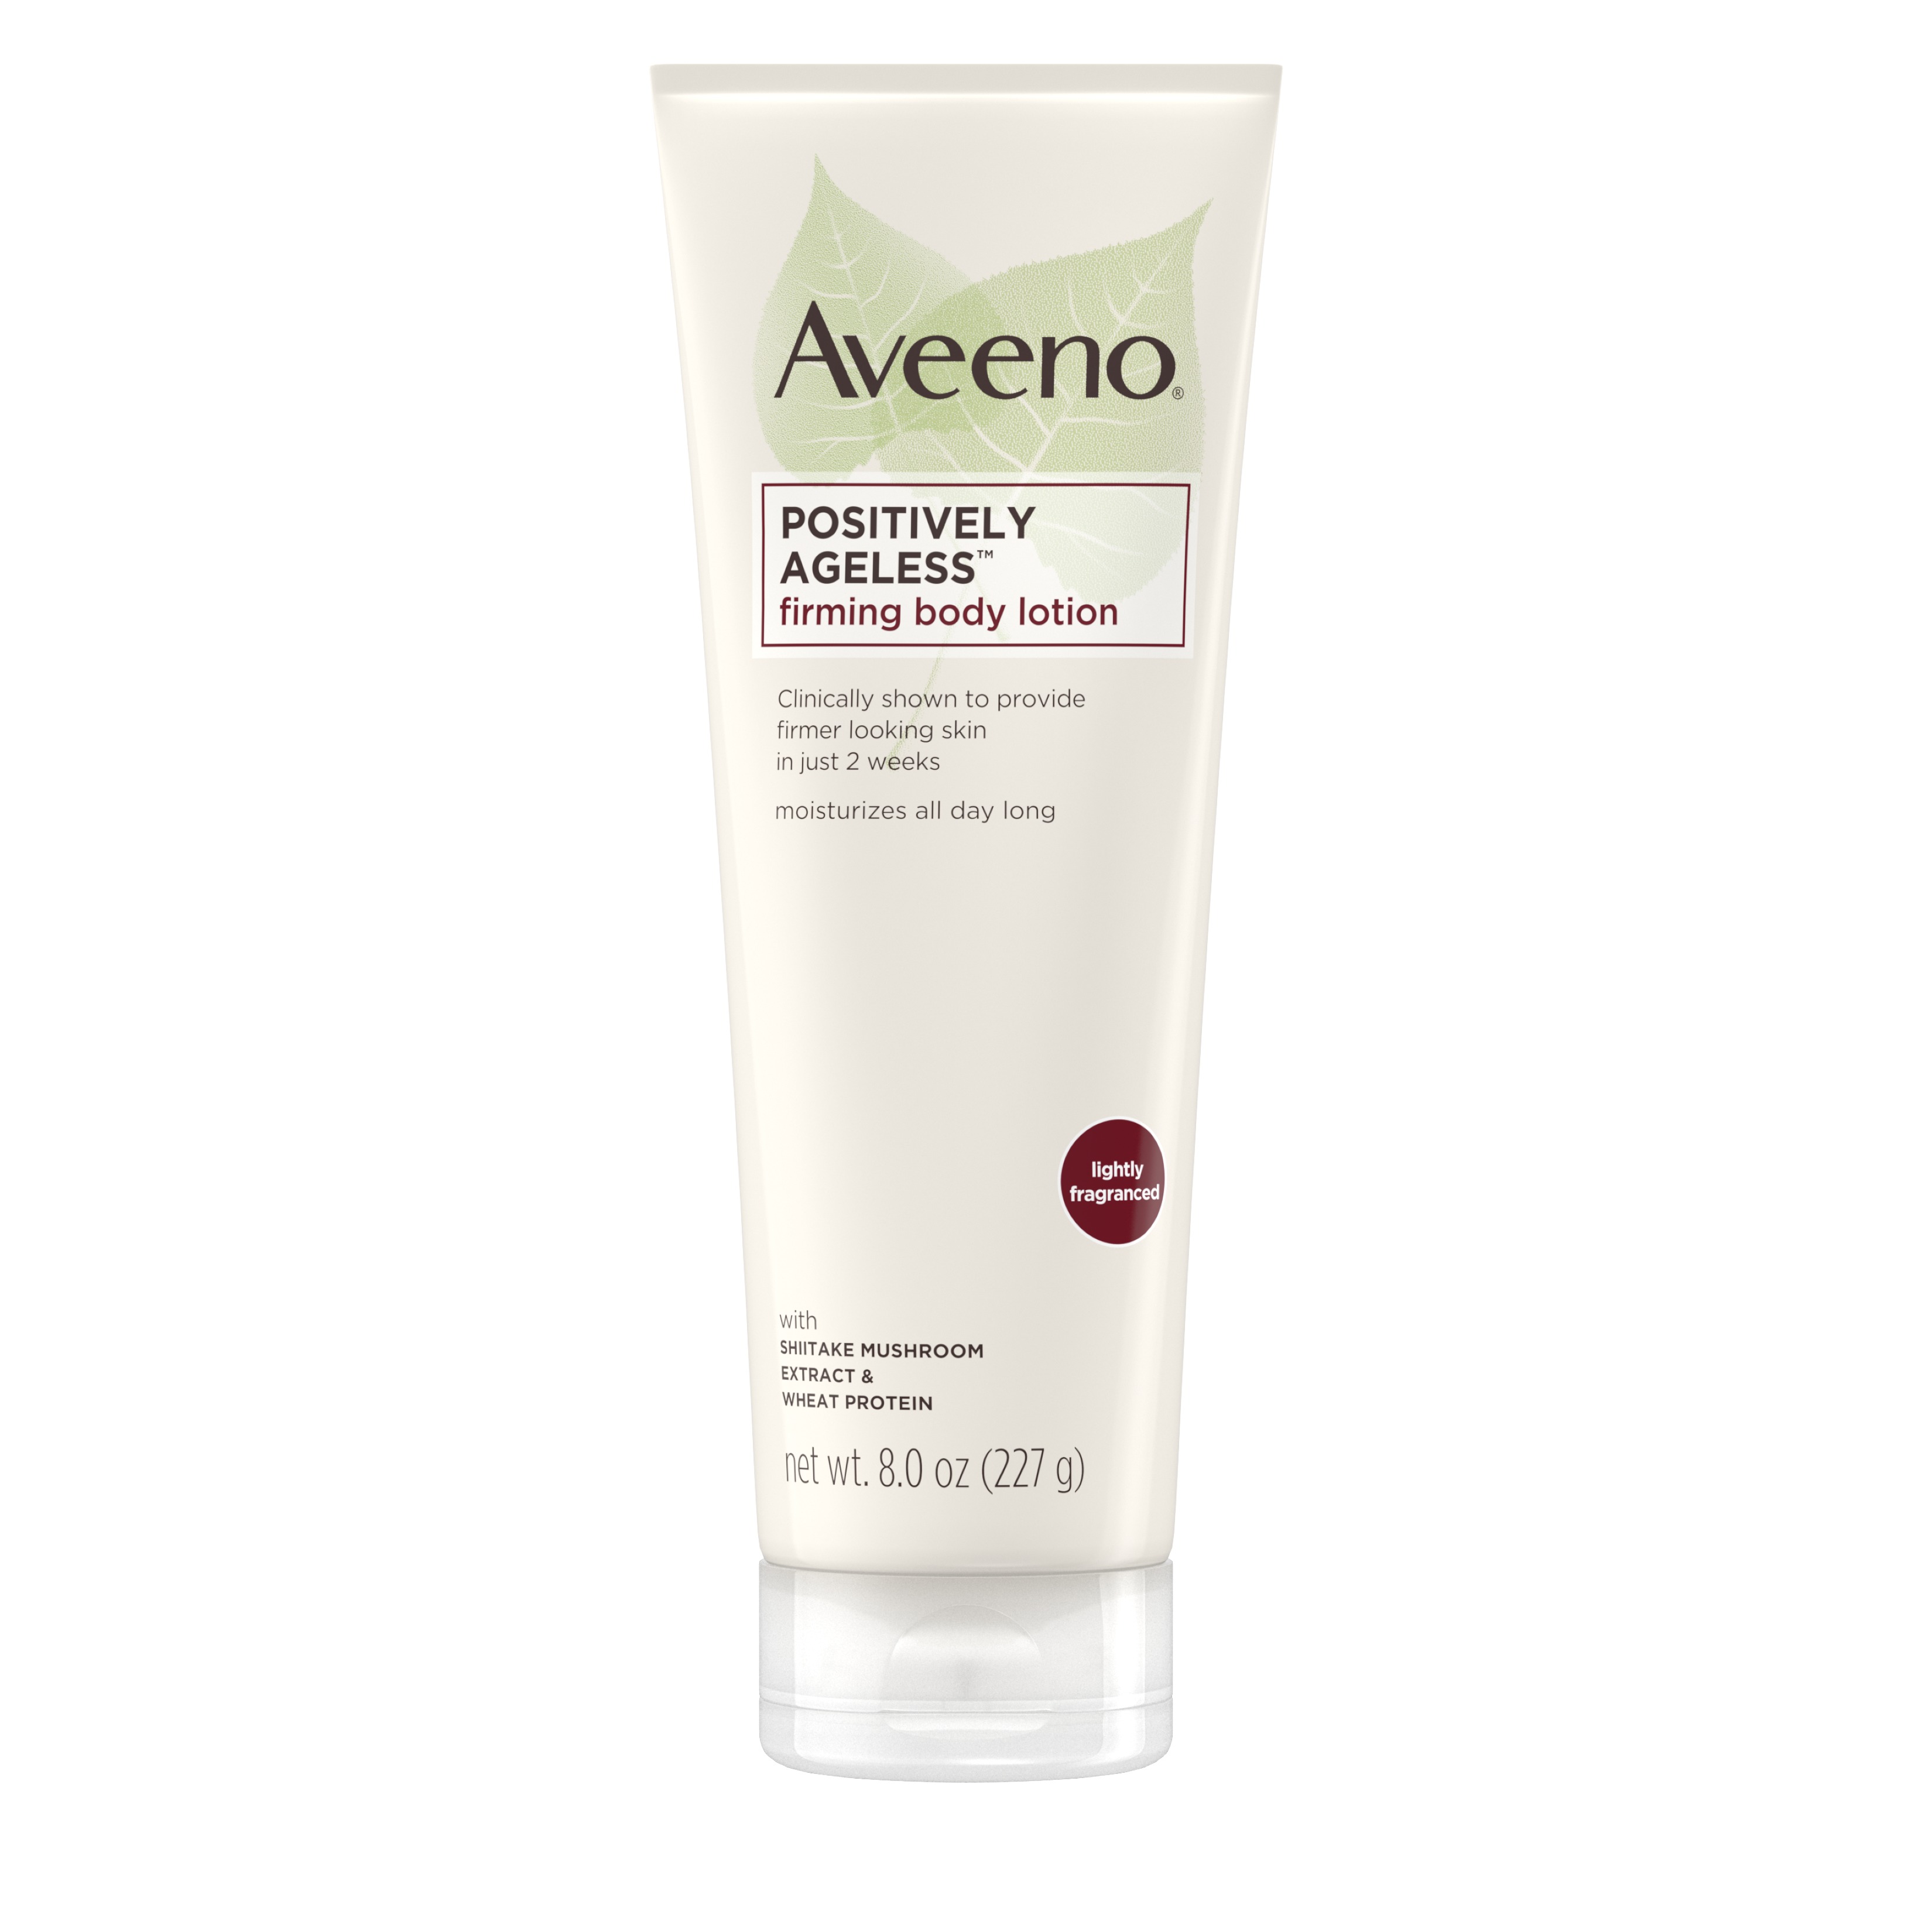 Aveeno Positively Ageless Anti-Aging Firming Body Lotion, 8 oz - image 1 of 7